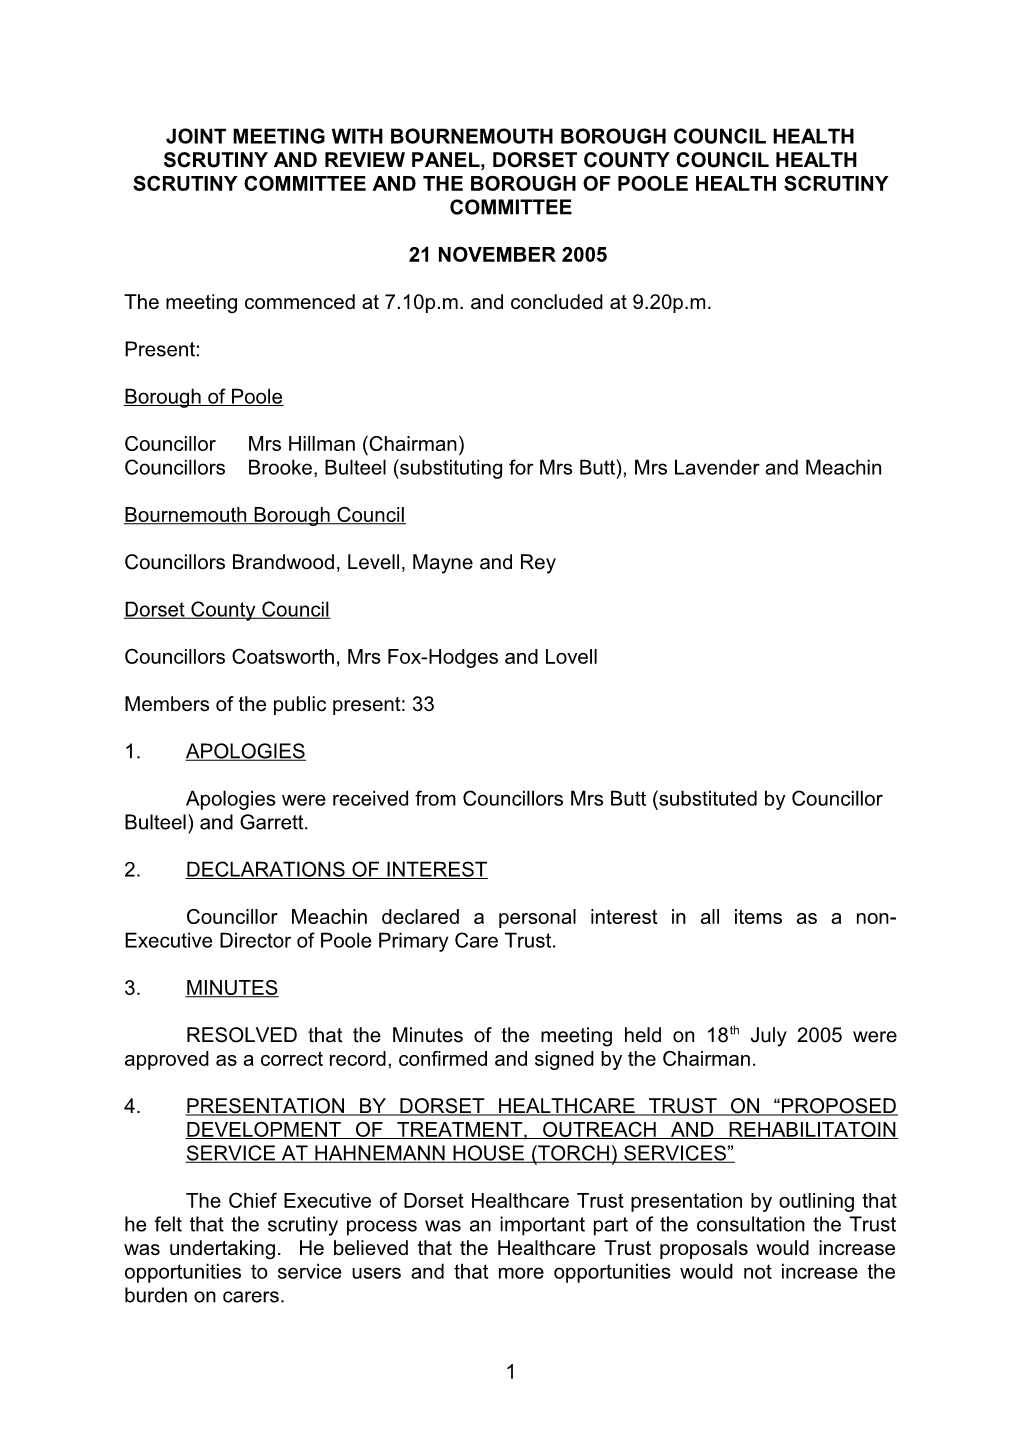 Minutes - Joint Meeting with Bournemouth Borough Council Health Scrutiny Review Panel